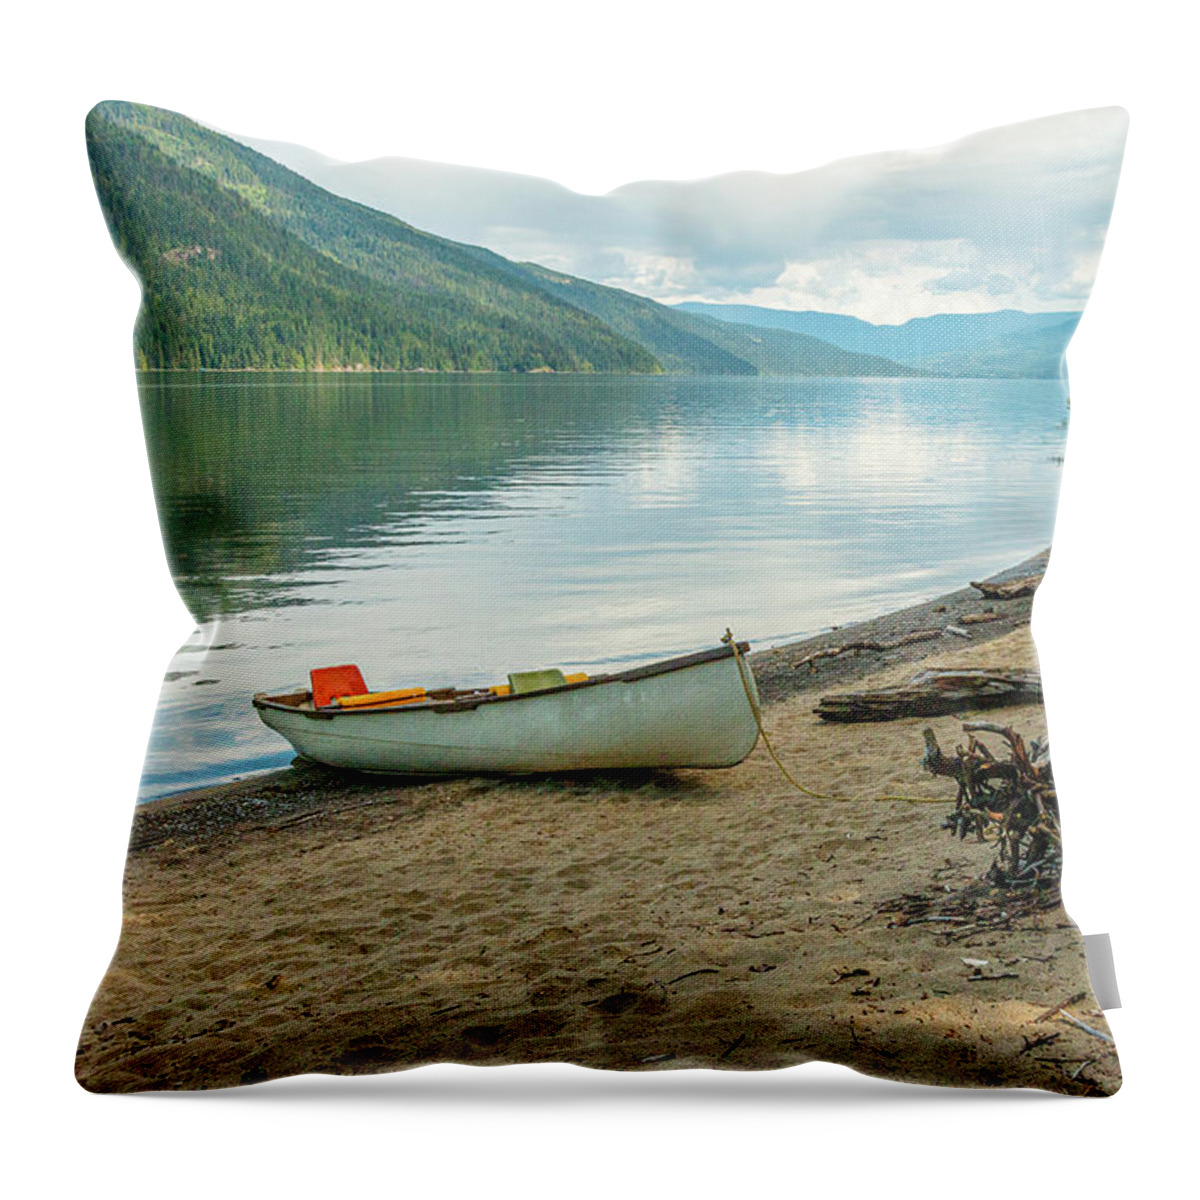 Landscapes Throw Pillow featuring the photograph Canoe At Mable Lake by Claude Dalley